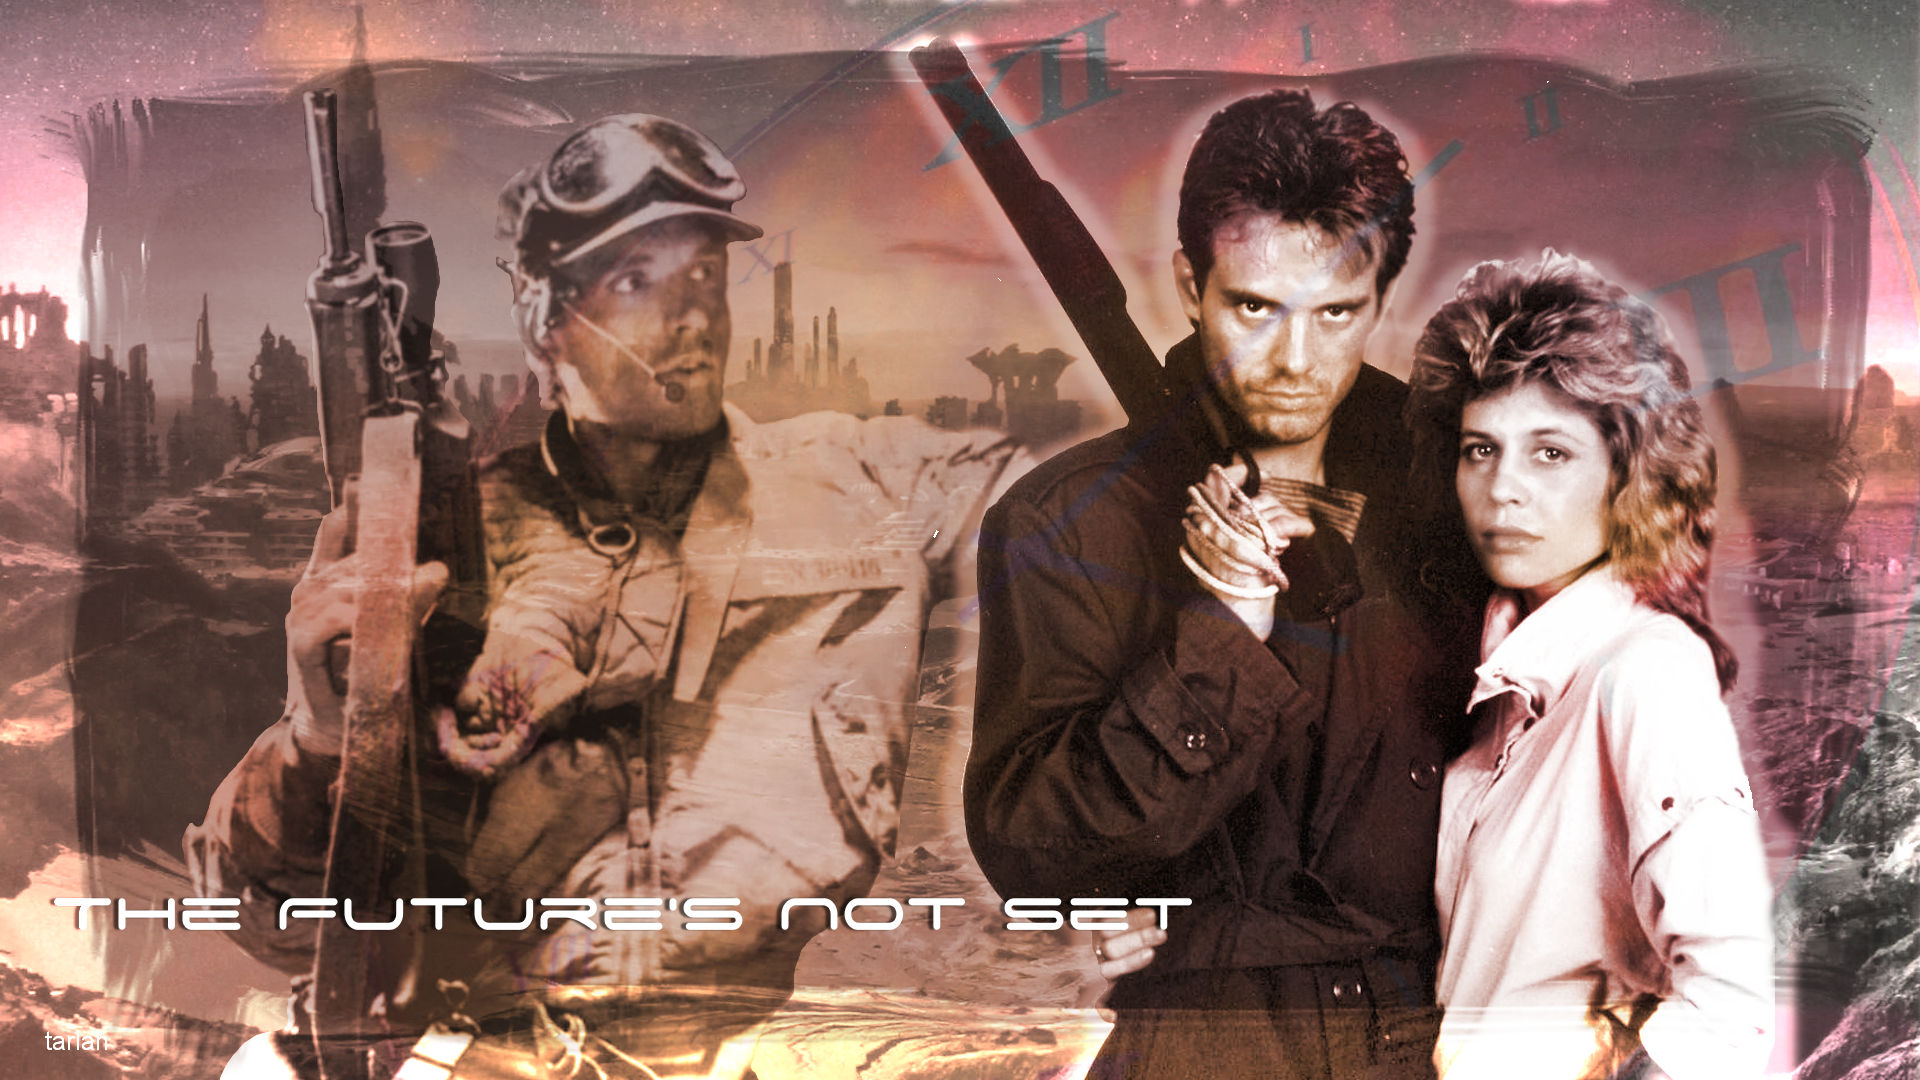 Terminator - Kyle and Sarah Wallpaper by Tarlan
Created for Land of Art landcomm challenge
Keywords: terminator_art;terminator_wpr